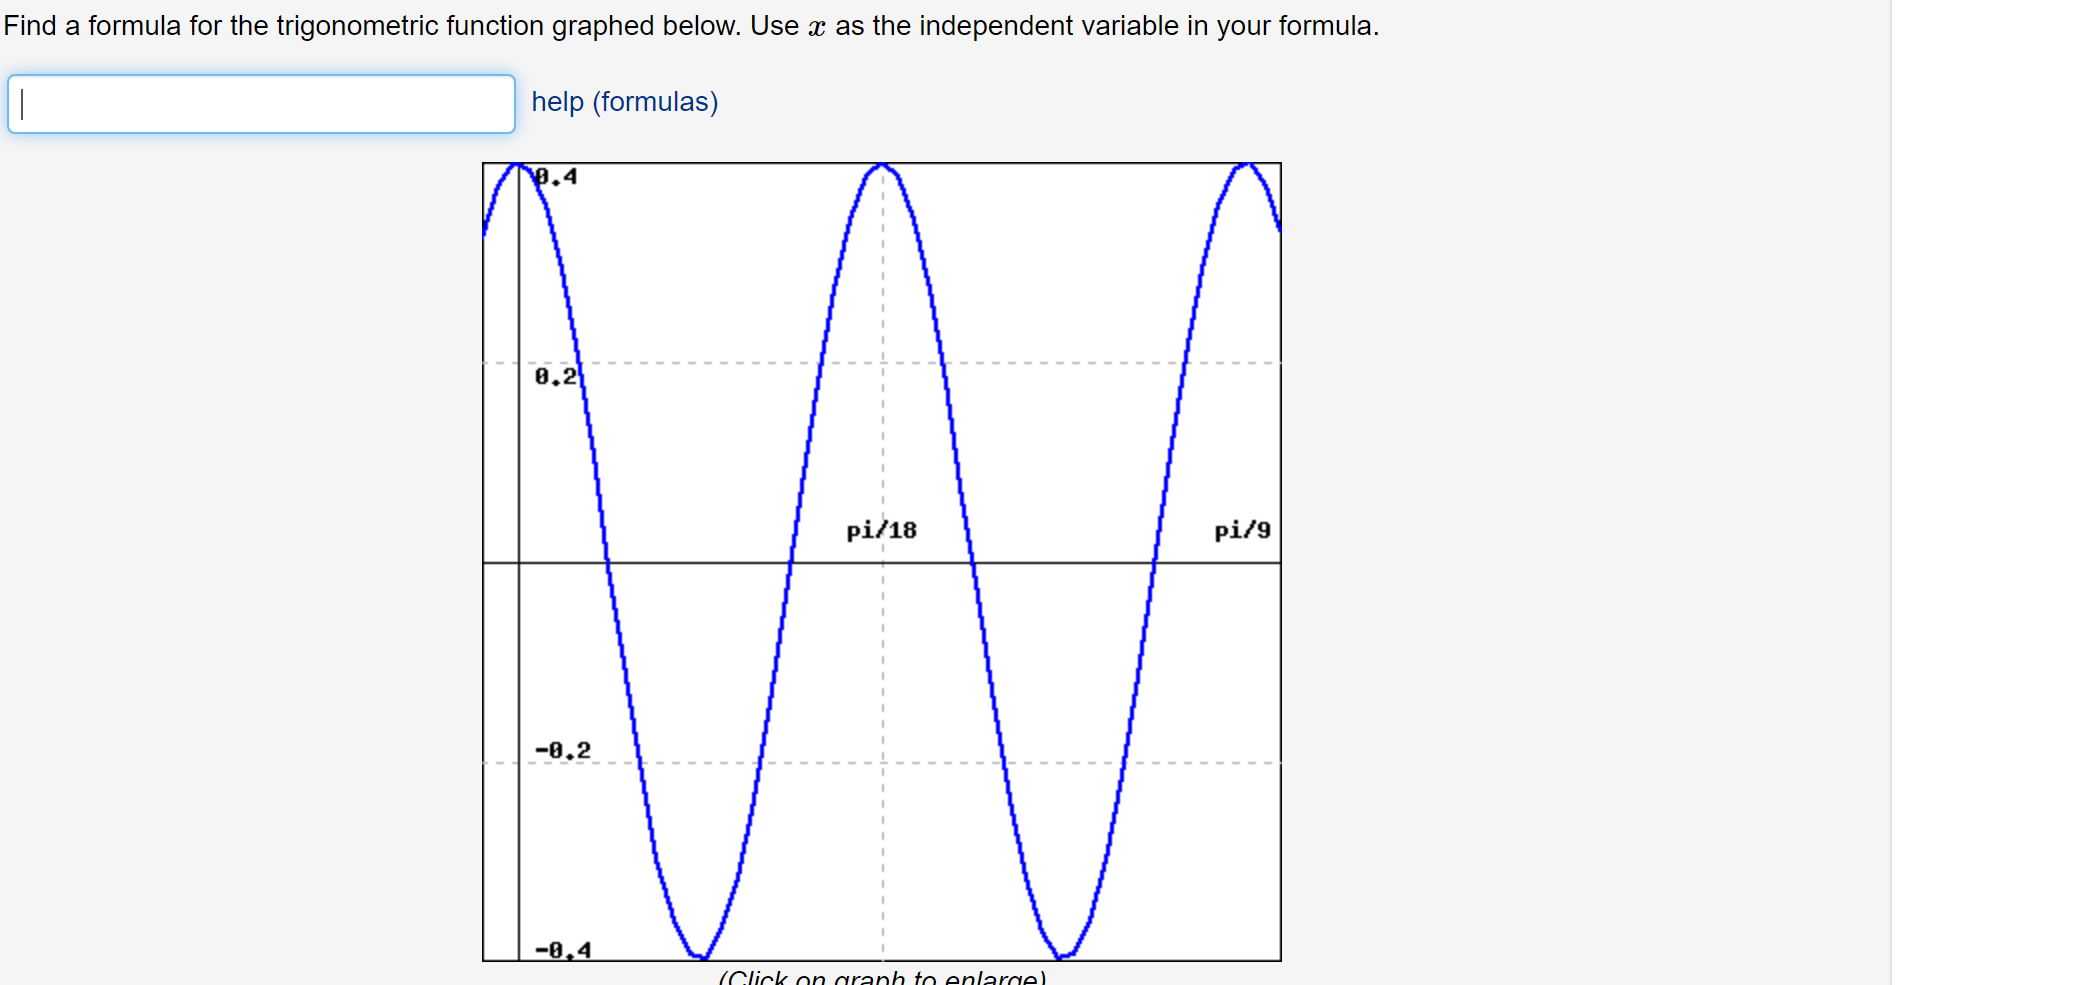 Find a formula for the trigonometric function graphed below. Use x as the independent variable in your formula.
help (formulas)
.4
0.2
pi/18
pi/9
-8.2
-8,4
(Click on araph to enlarge).
